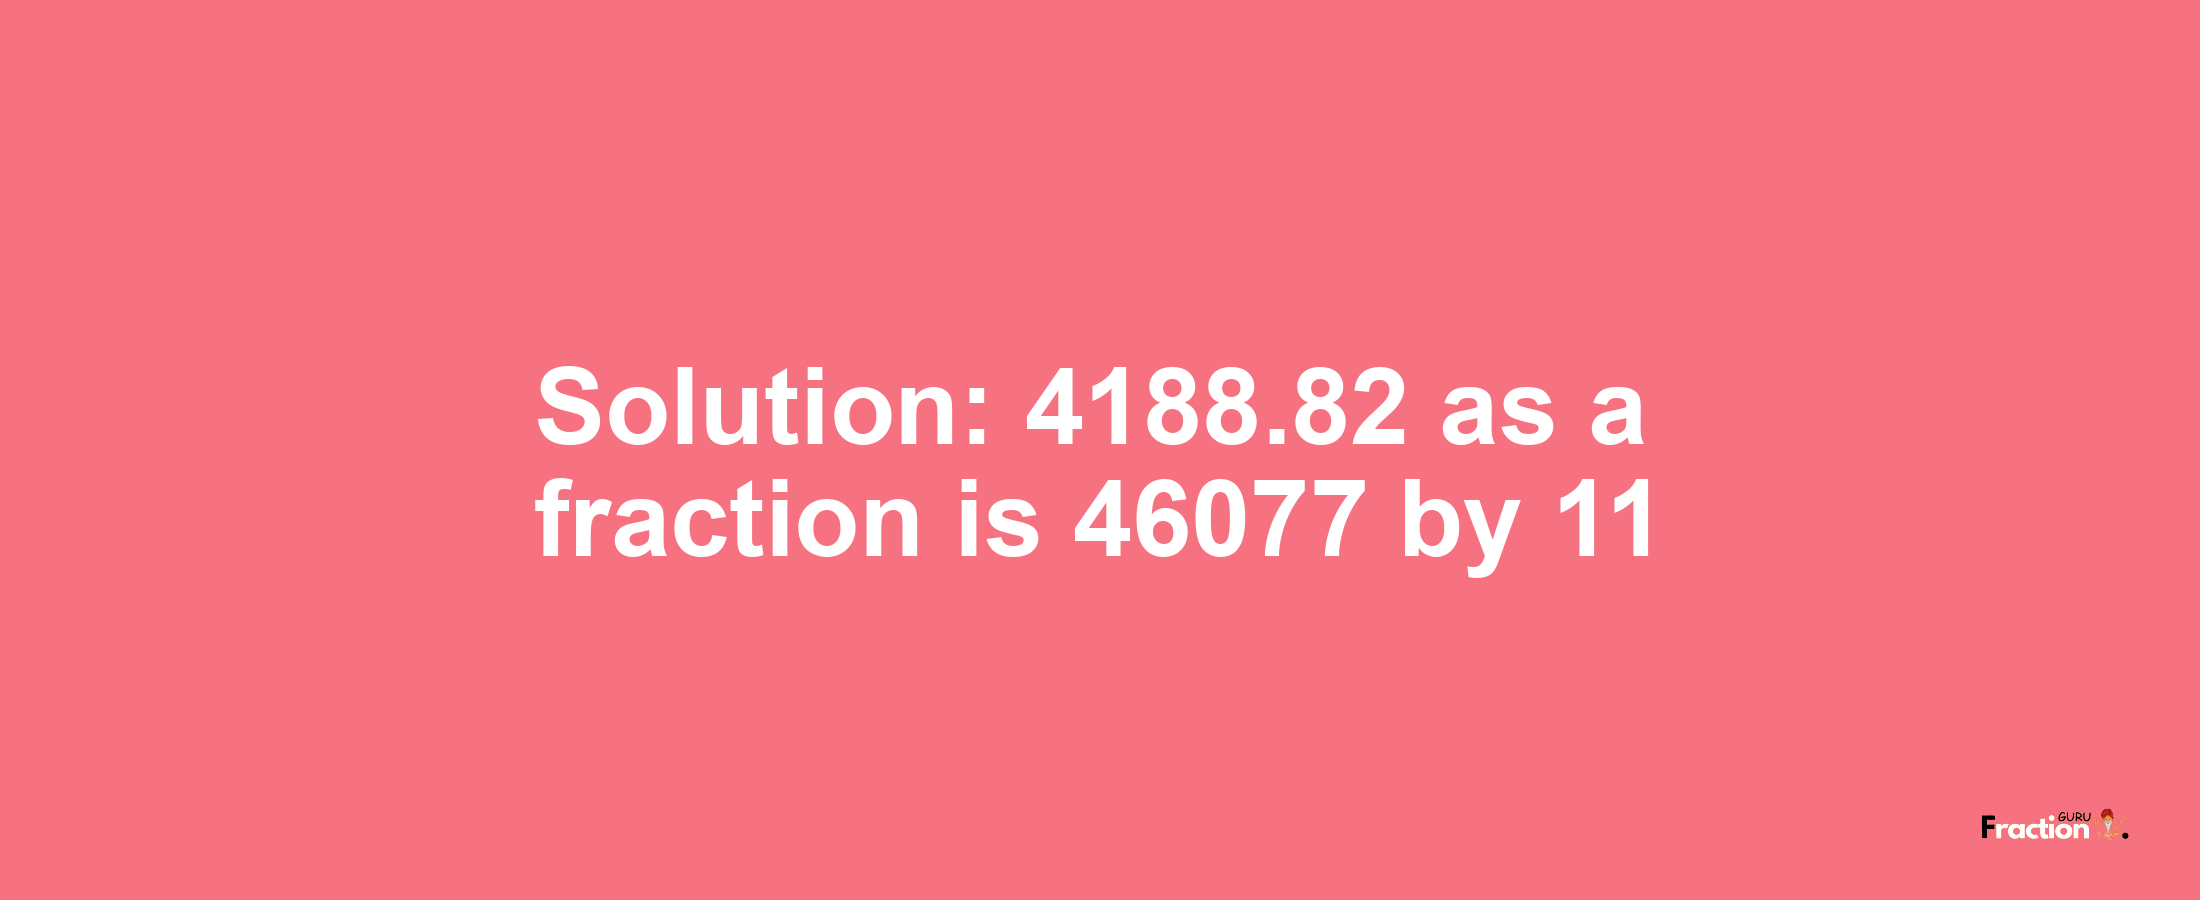 Solution:4188.82 as a fraction is 46077/11